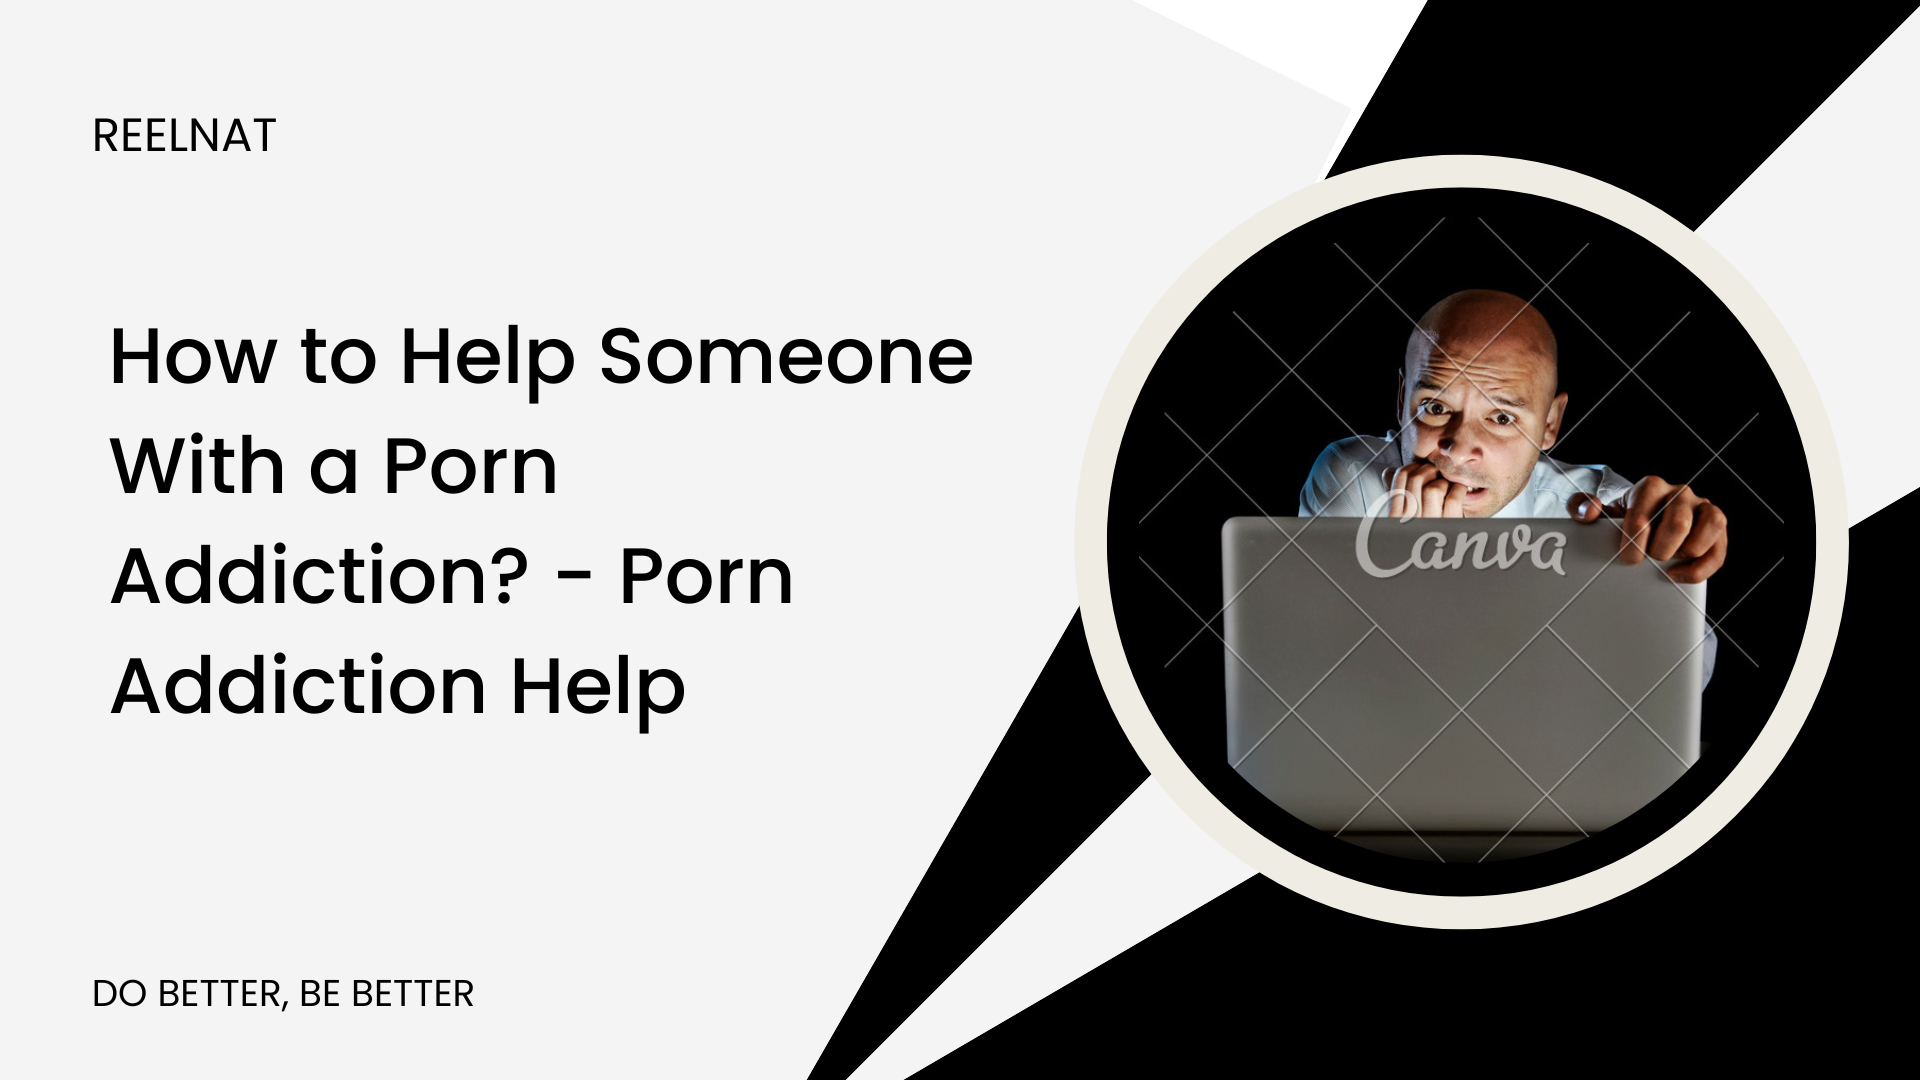 How to Help Someone With a Porn Addiction? – Porn Addiction Help